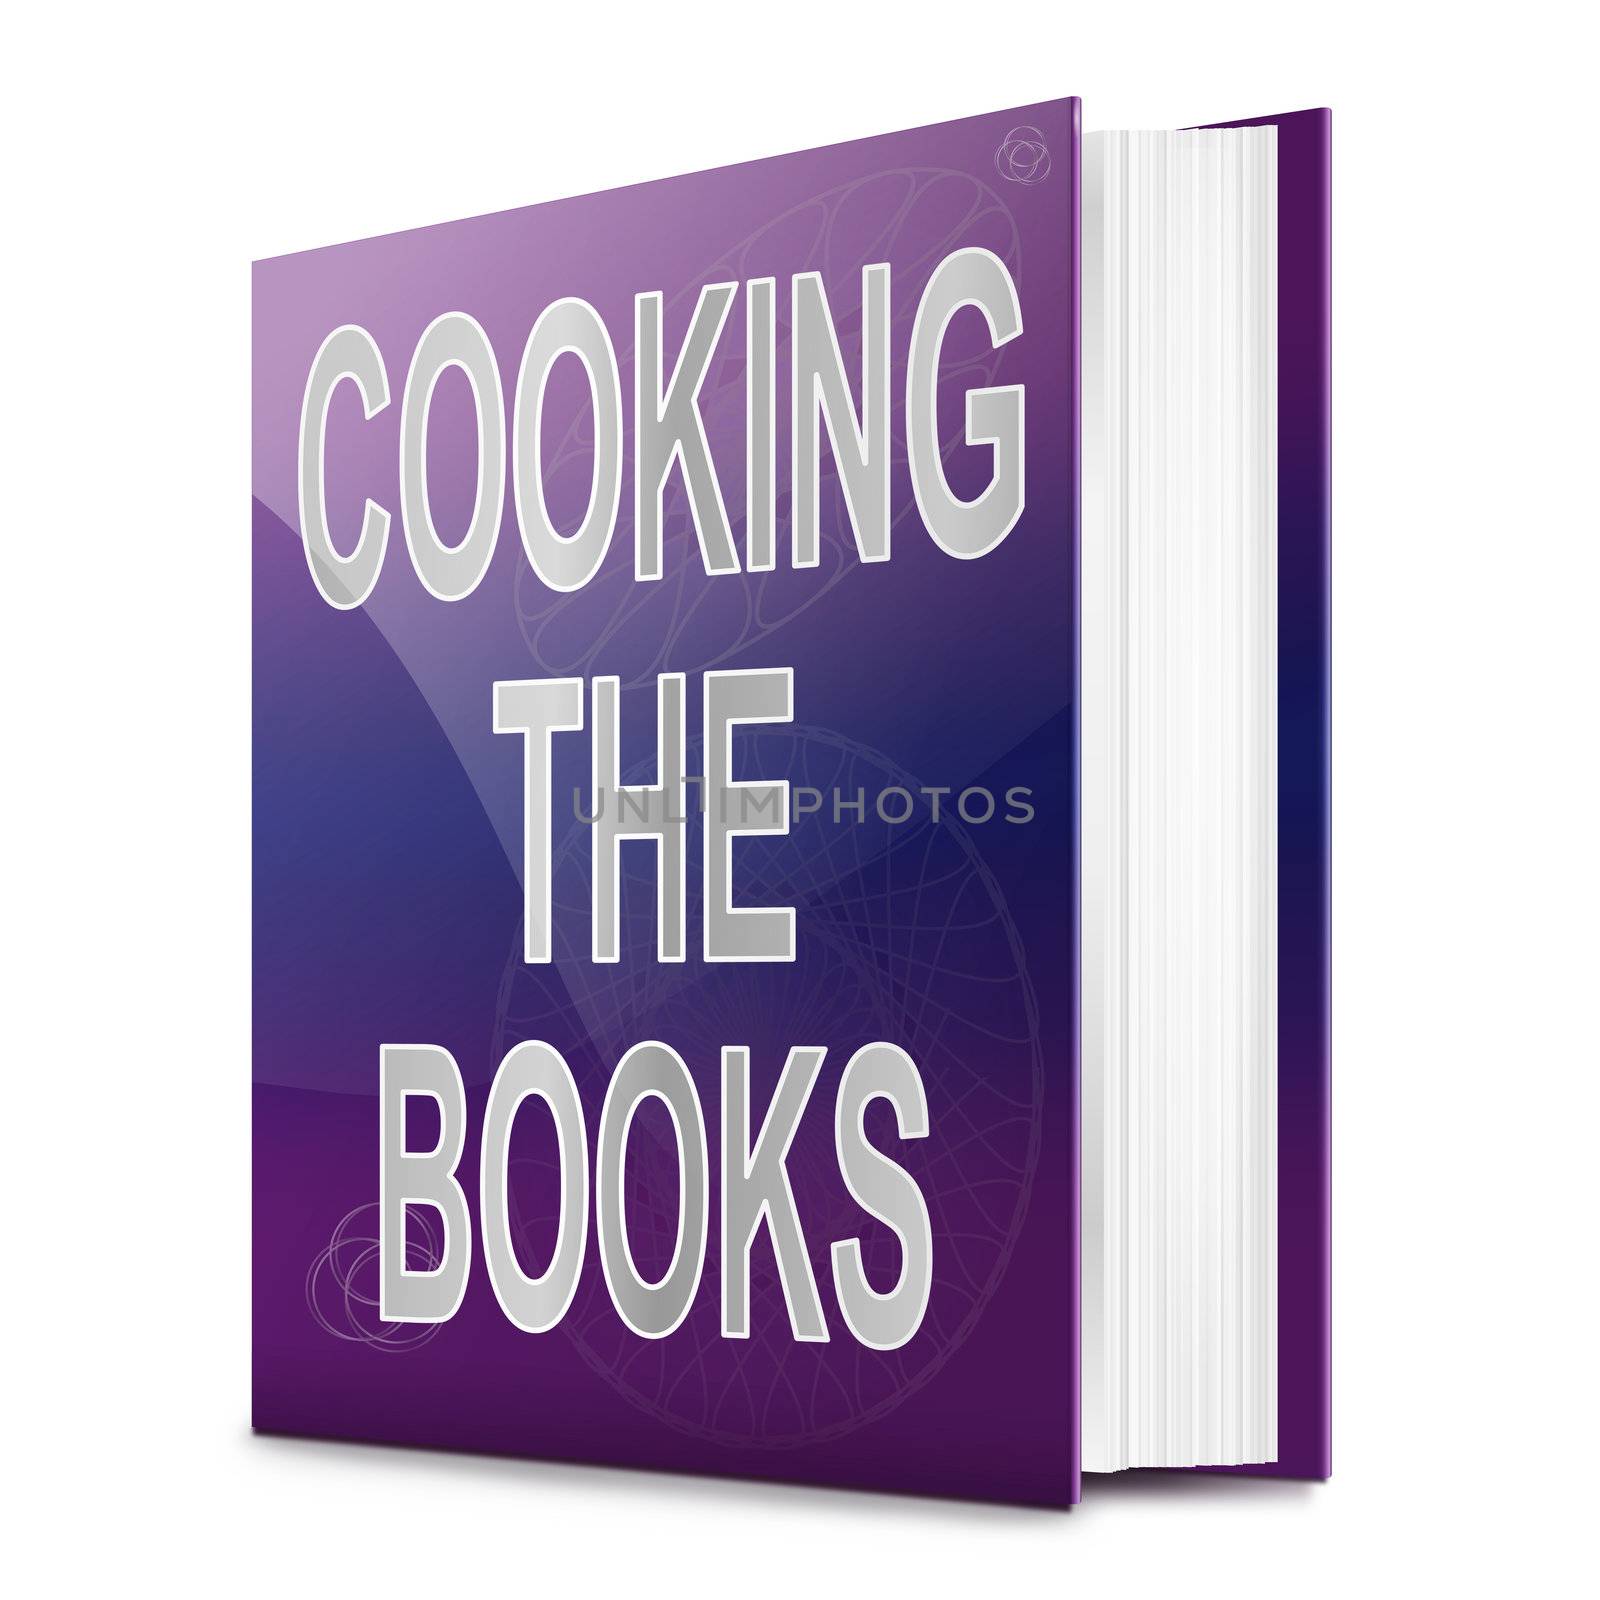 Cooking the books concept. by 72soul